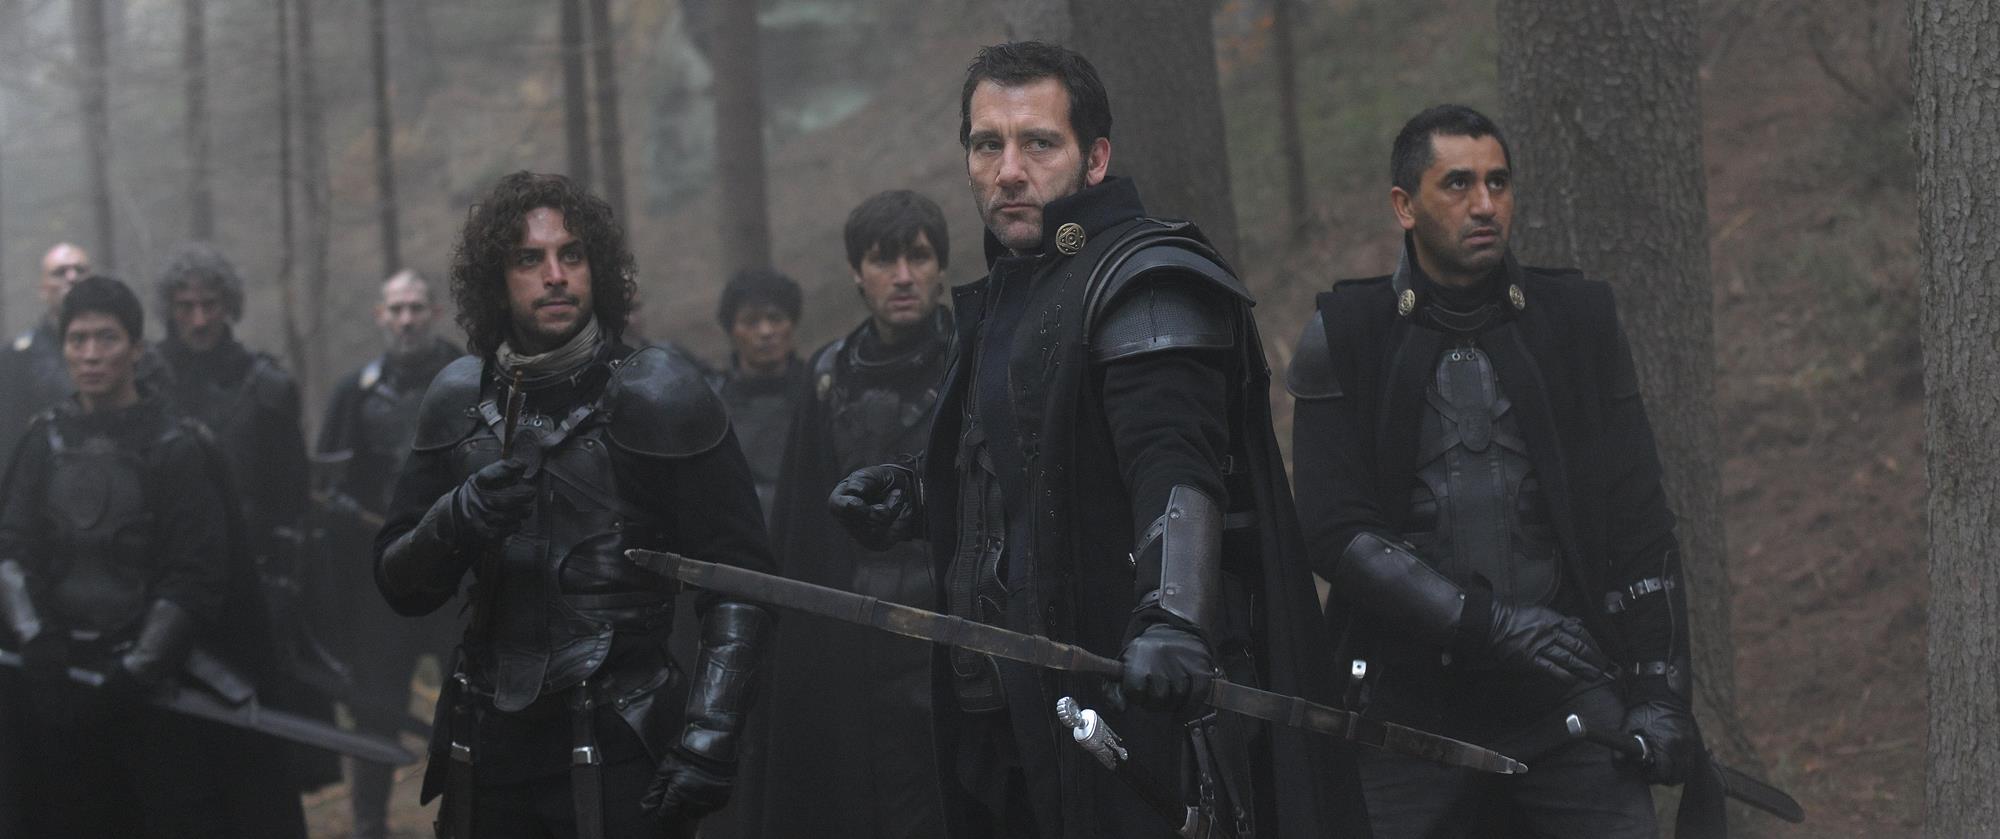 movie review last knights